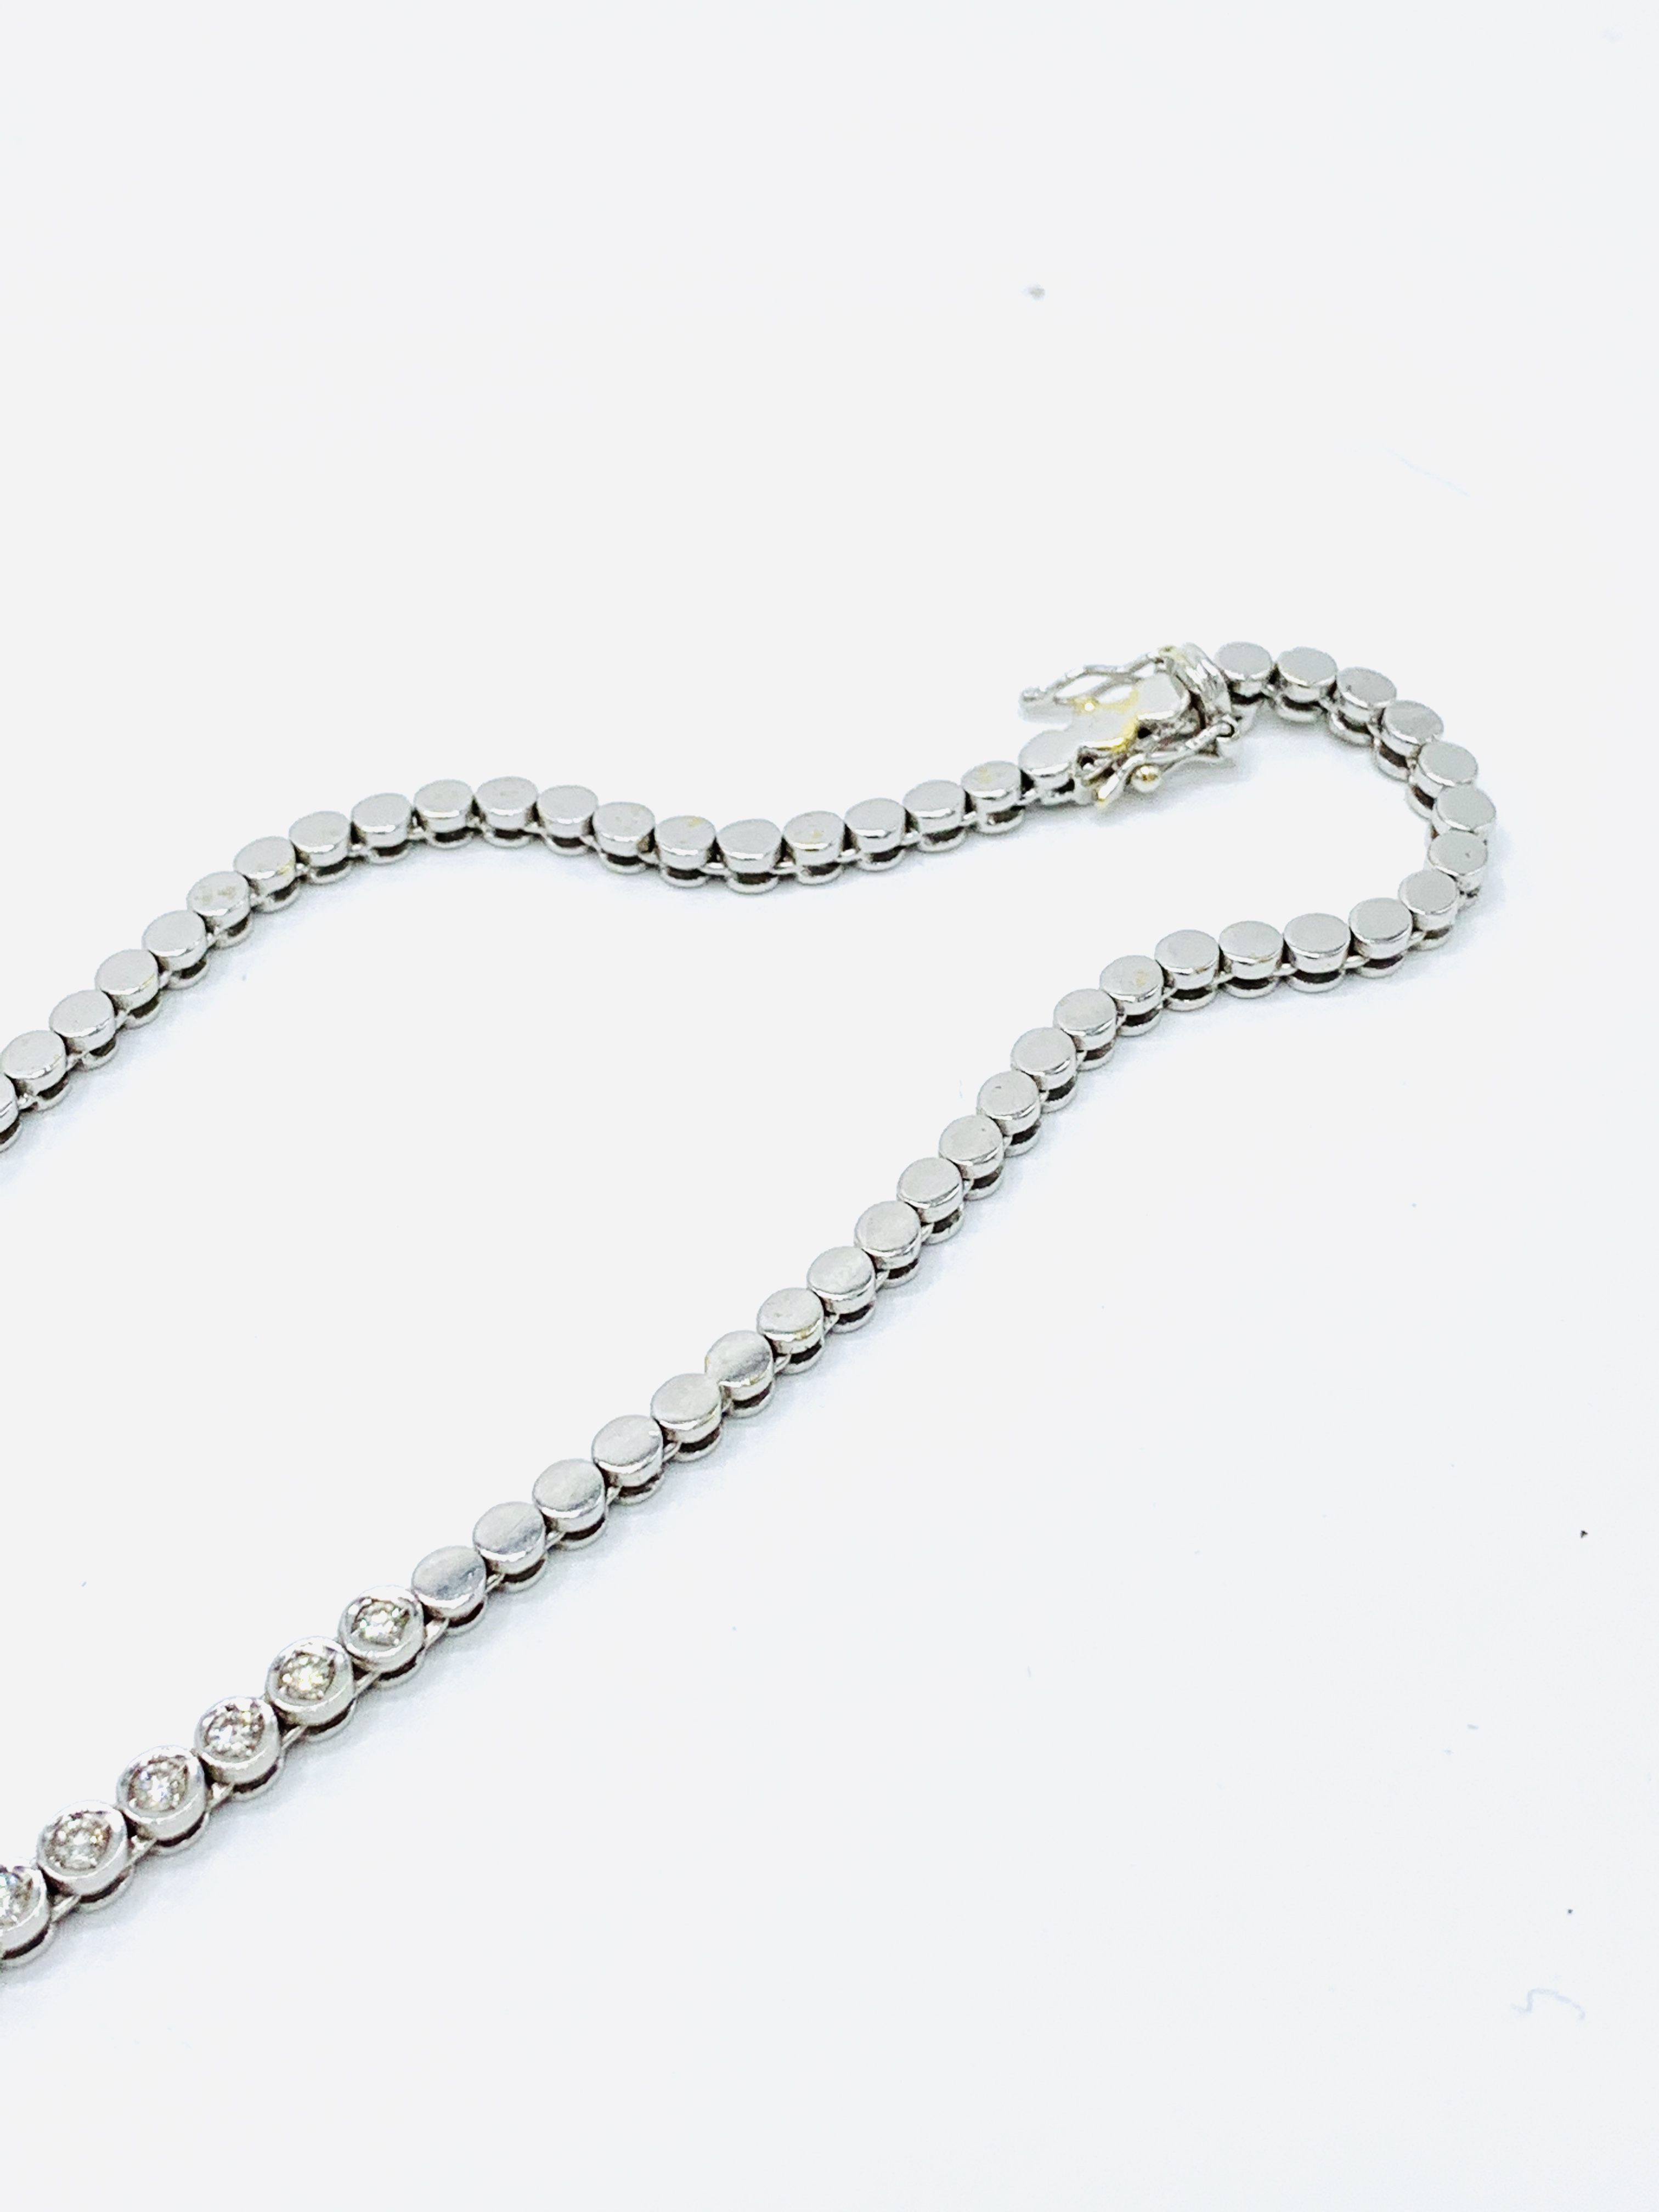 18ct white gold diamond necklace. - Image 5 of 5